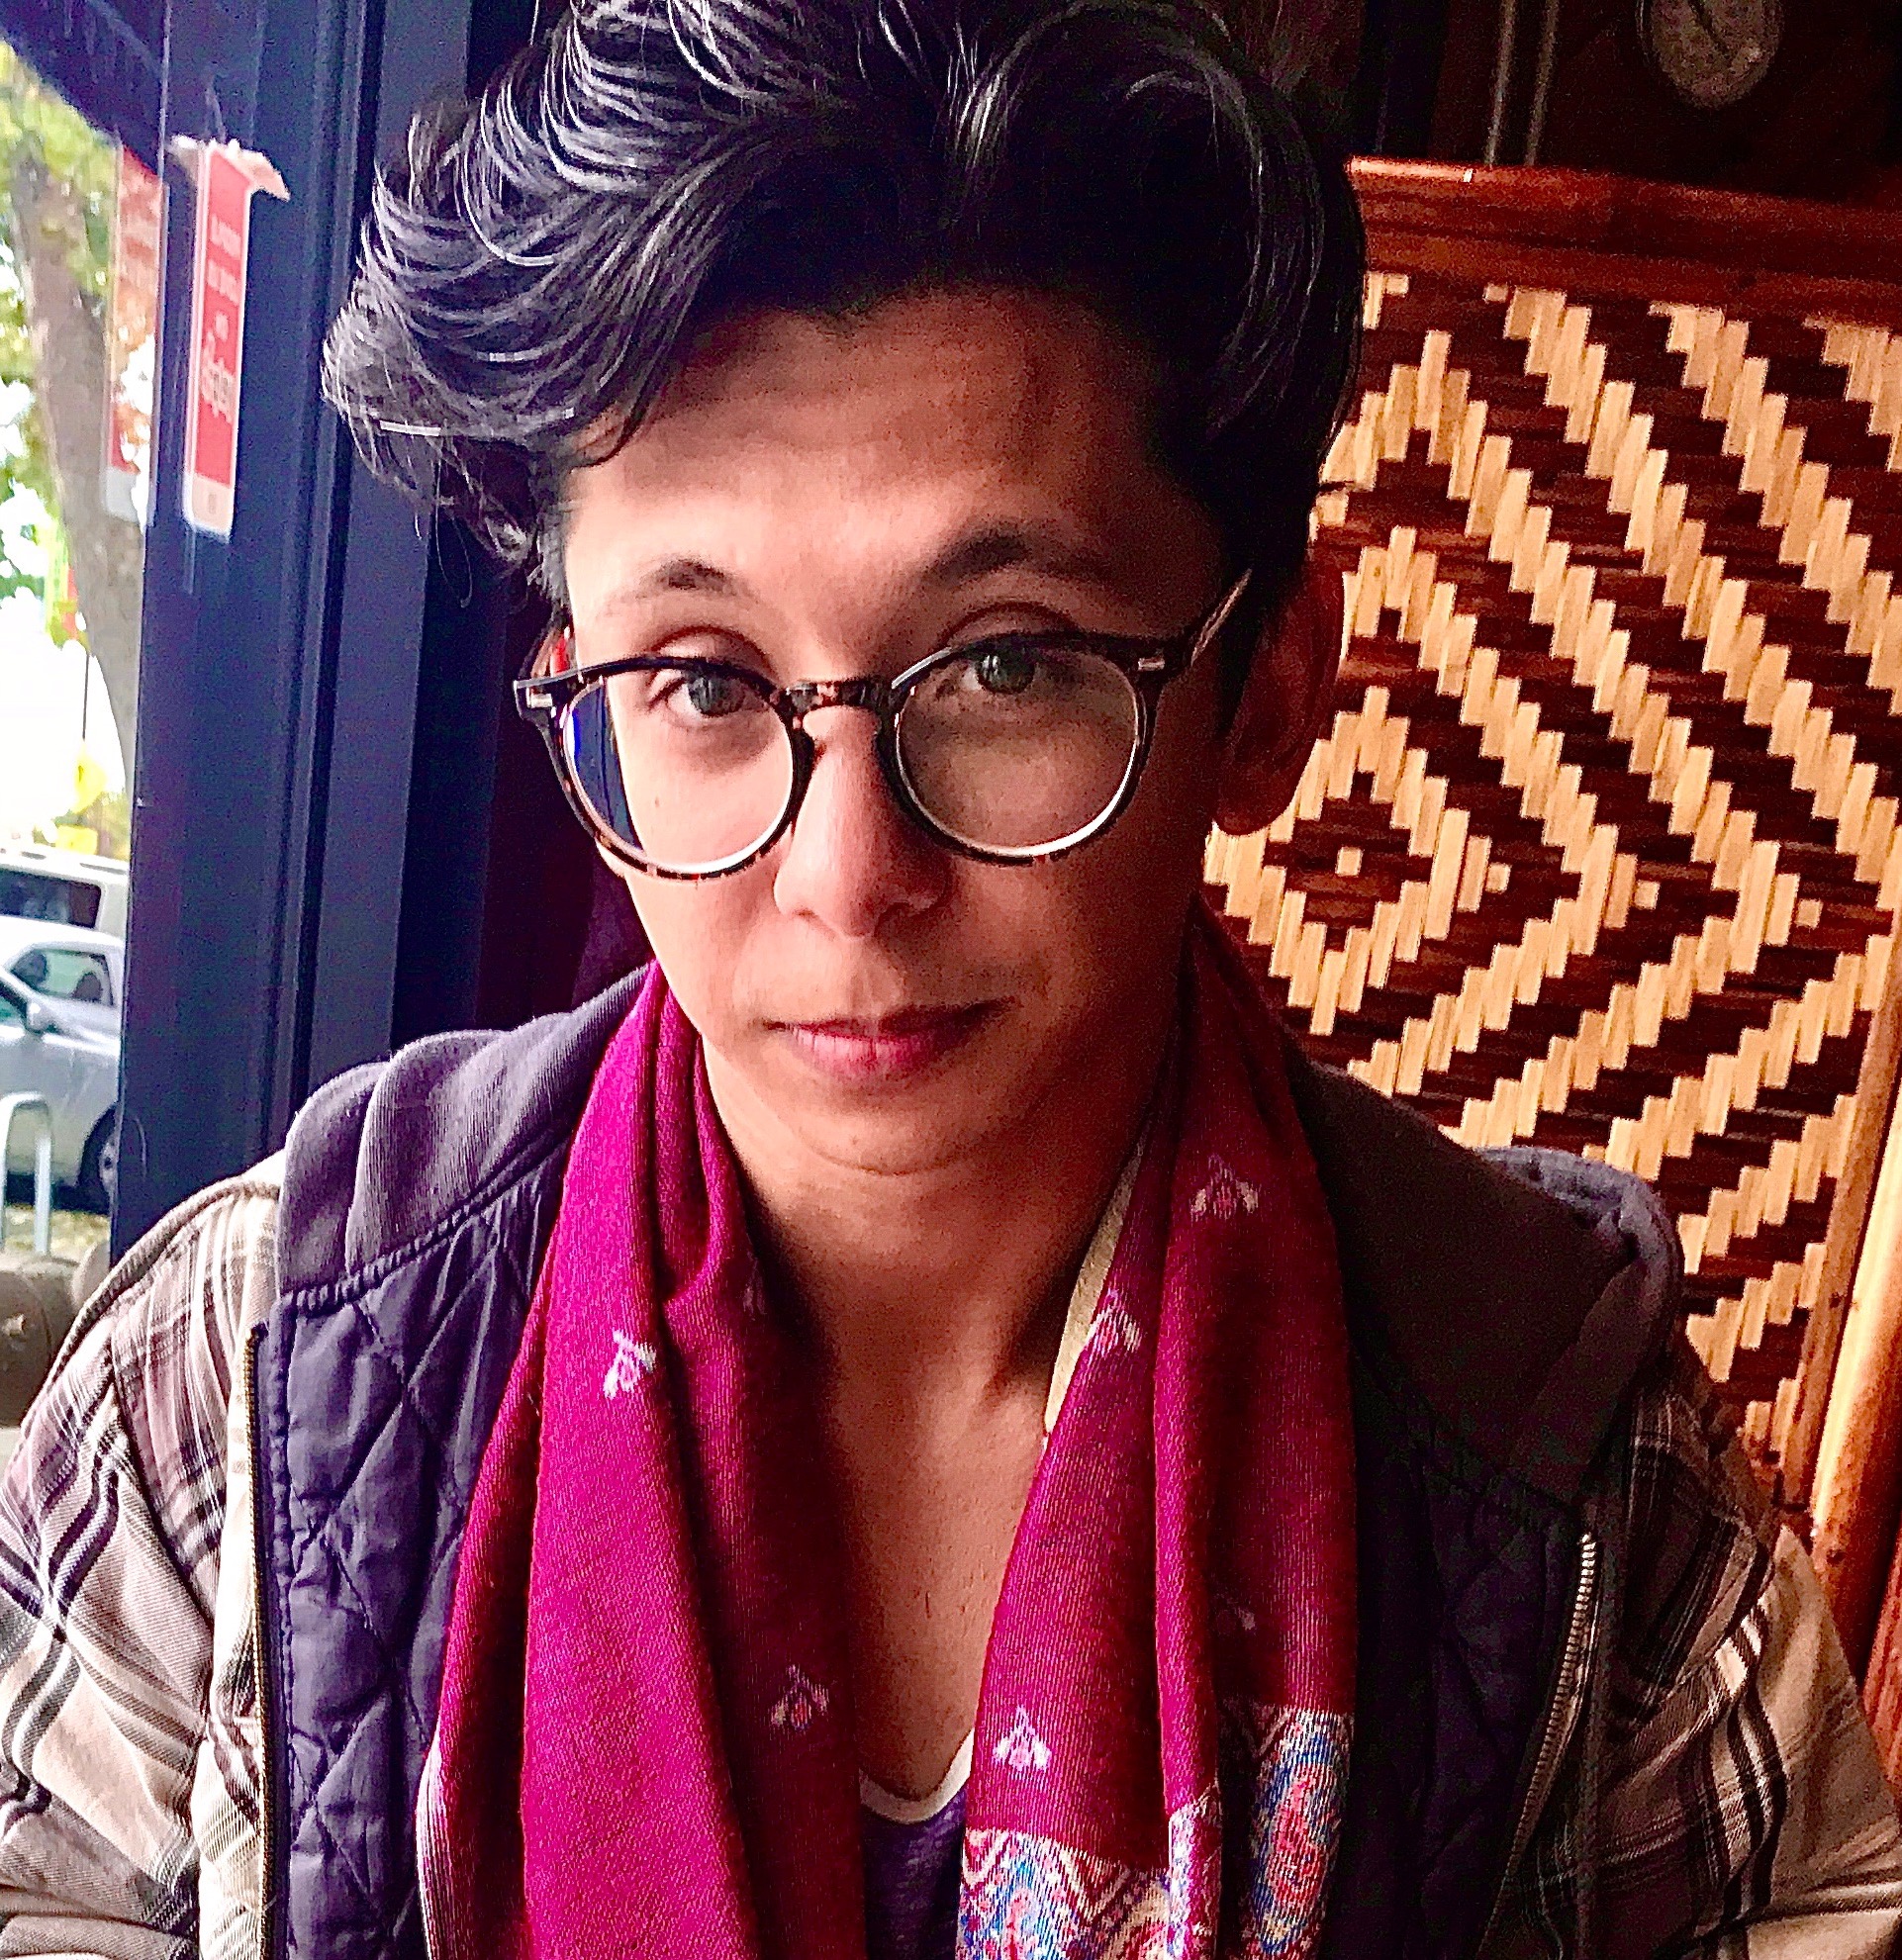 Picture of Manuel with a pink scarf and glasses and a geometric pattern on the chair behind them.